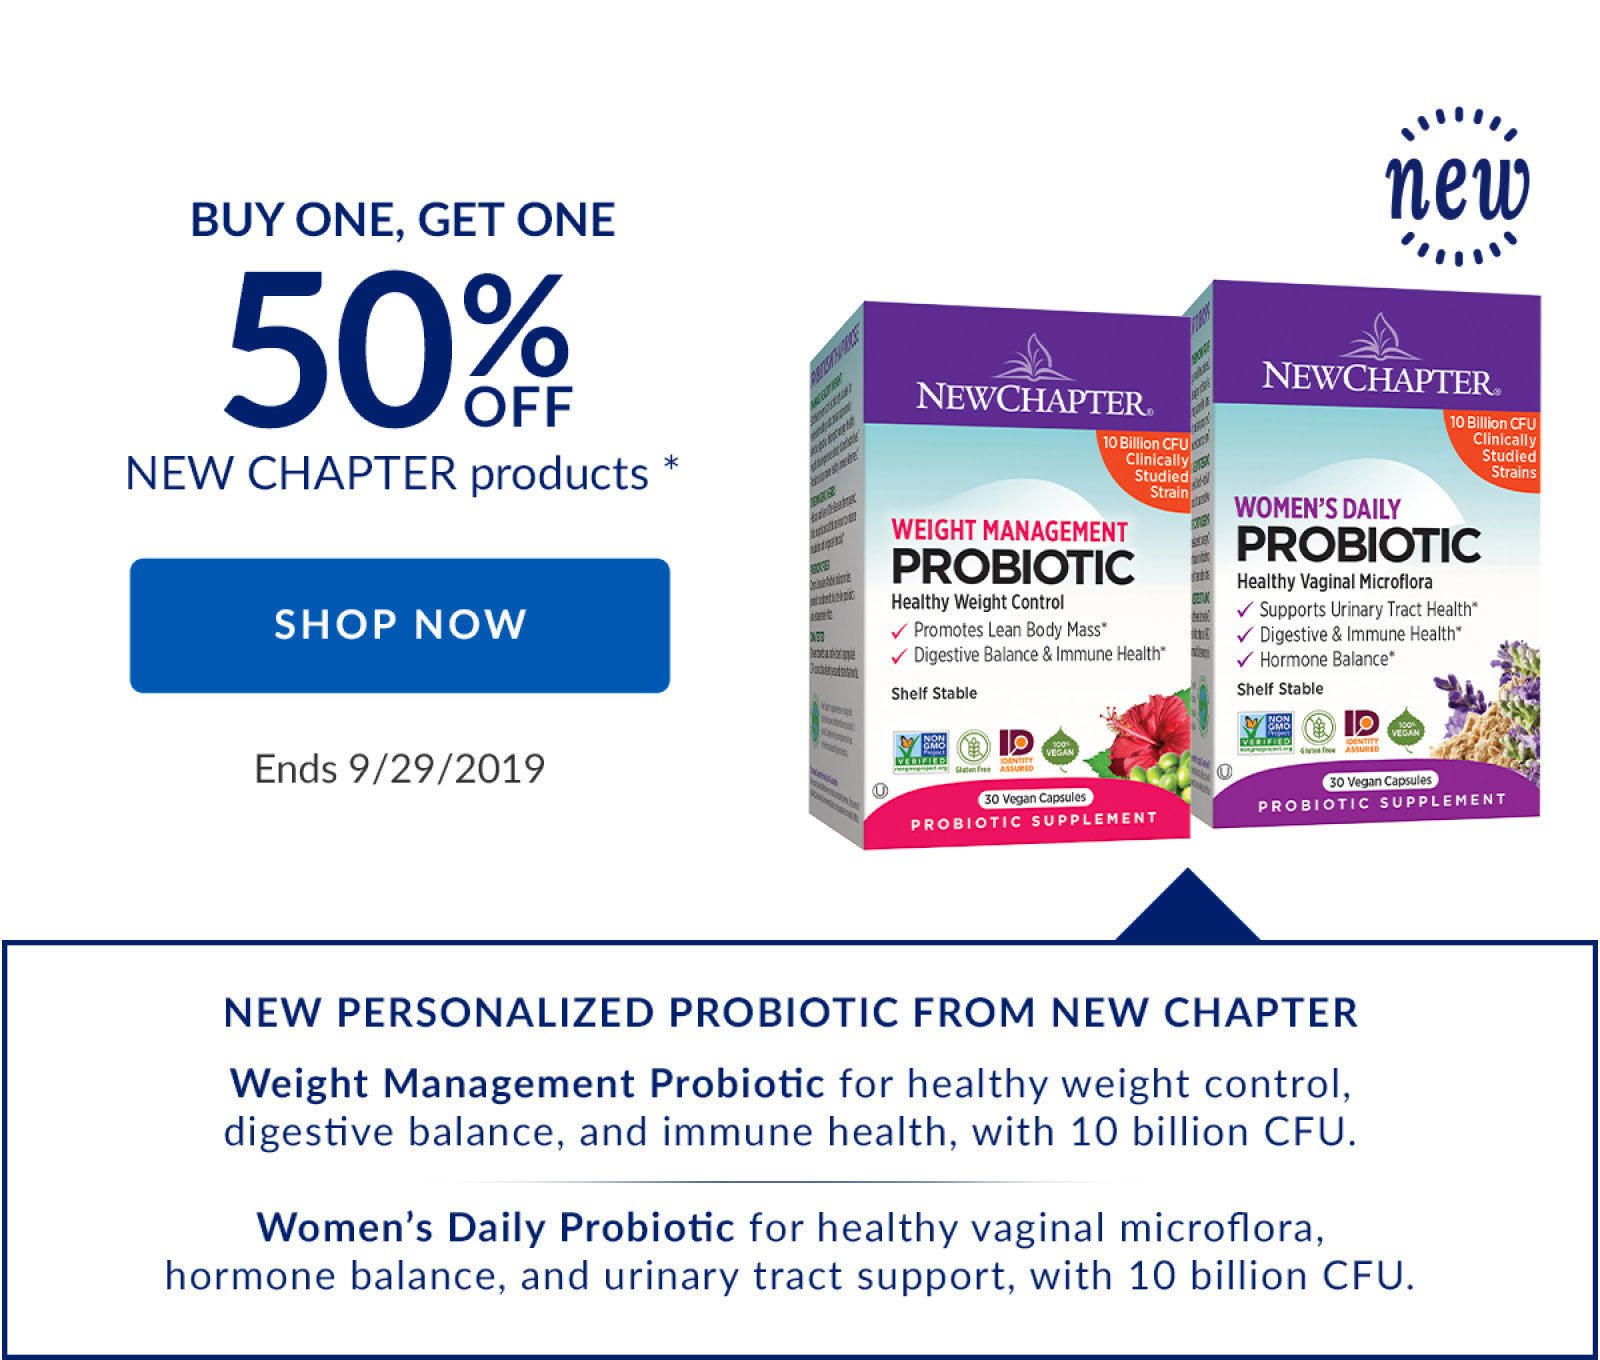 BUY ONE, GET ONE 50% OFF NEW CHAPTER products * | SHOP NOW | Ends 9/29/2019 | NEW PERSONALIZED PROBIOTIC FROM NEW CHAPTER | Weight Management Probiotic for healthy weight control, digestive balance, and immune health, with 10 billion CFU. | Women's Daily Probiotic for healthy vaginal microflora, hormone balance, and urinary tract support, with 10 billion CFU.